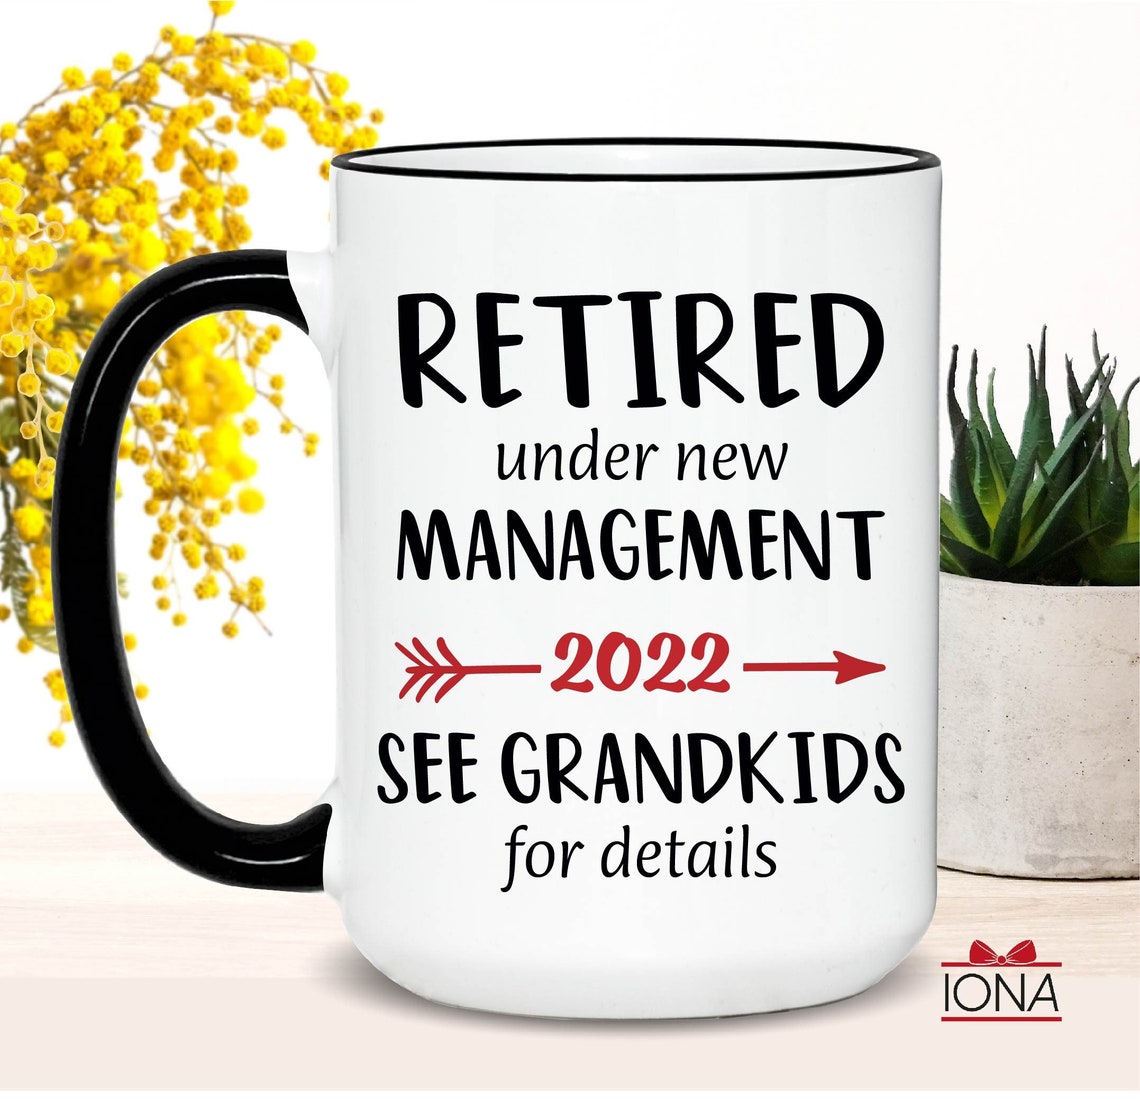 Retirement Coffee Mug–Retired under new management see grandkids - Funny Retirement Gift from Coworkers - Happy Retirement